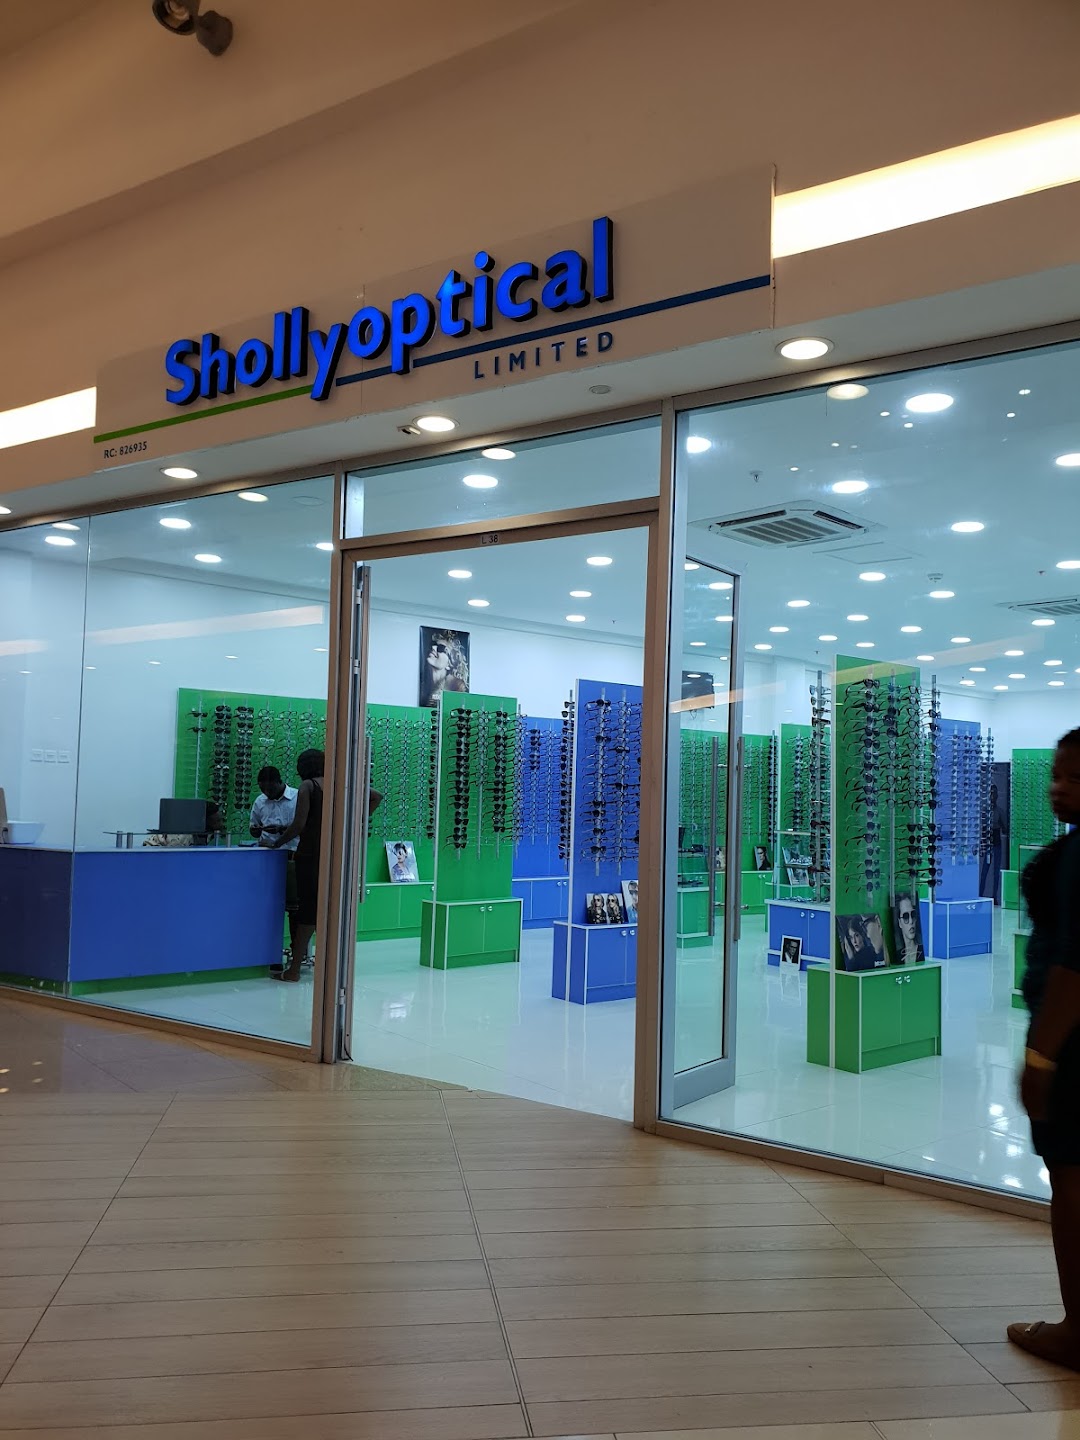 Sholly Opticals